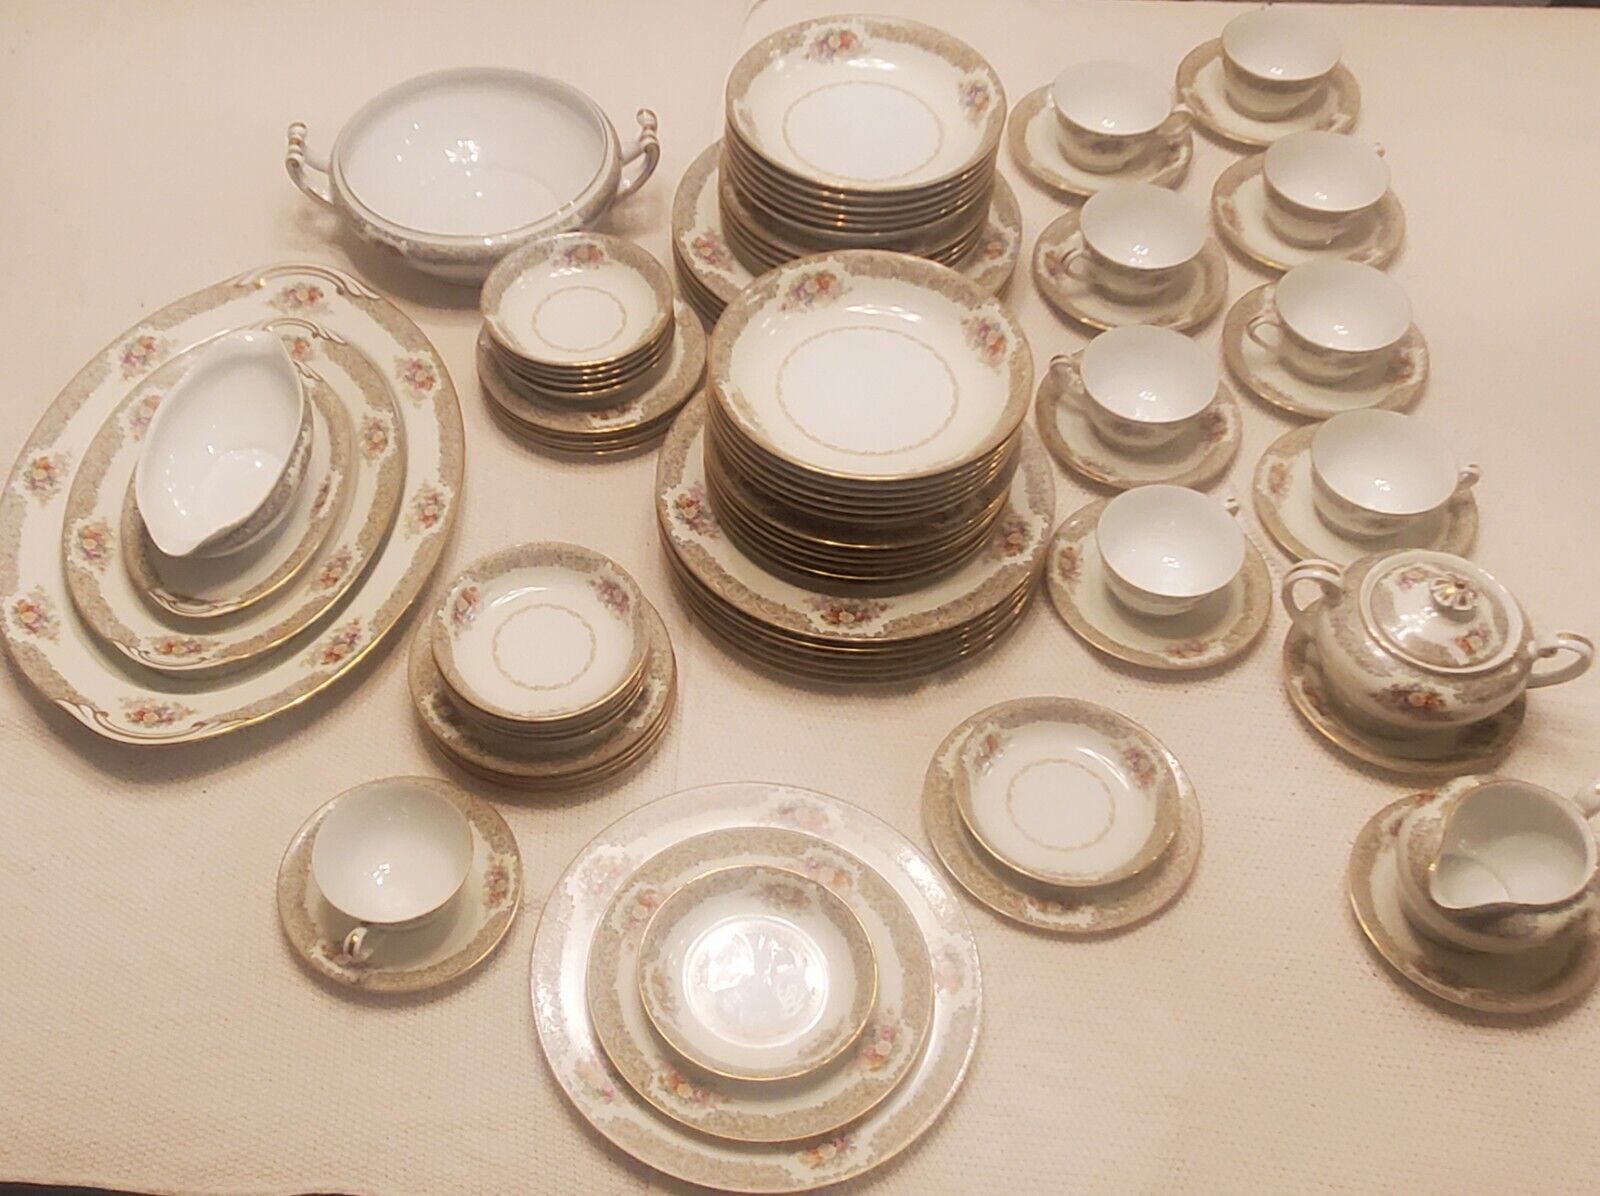 85-Piece Set of AICHI China made in Occupied Japan service for 12